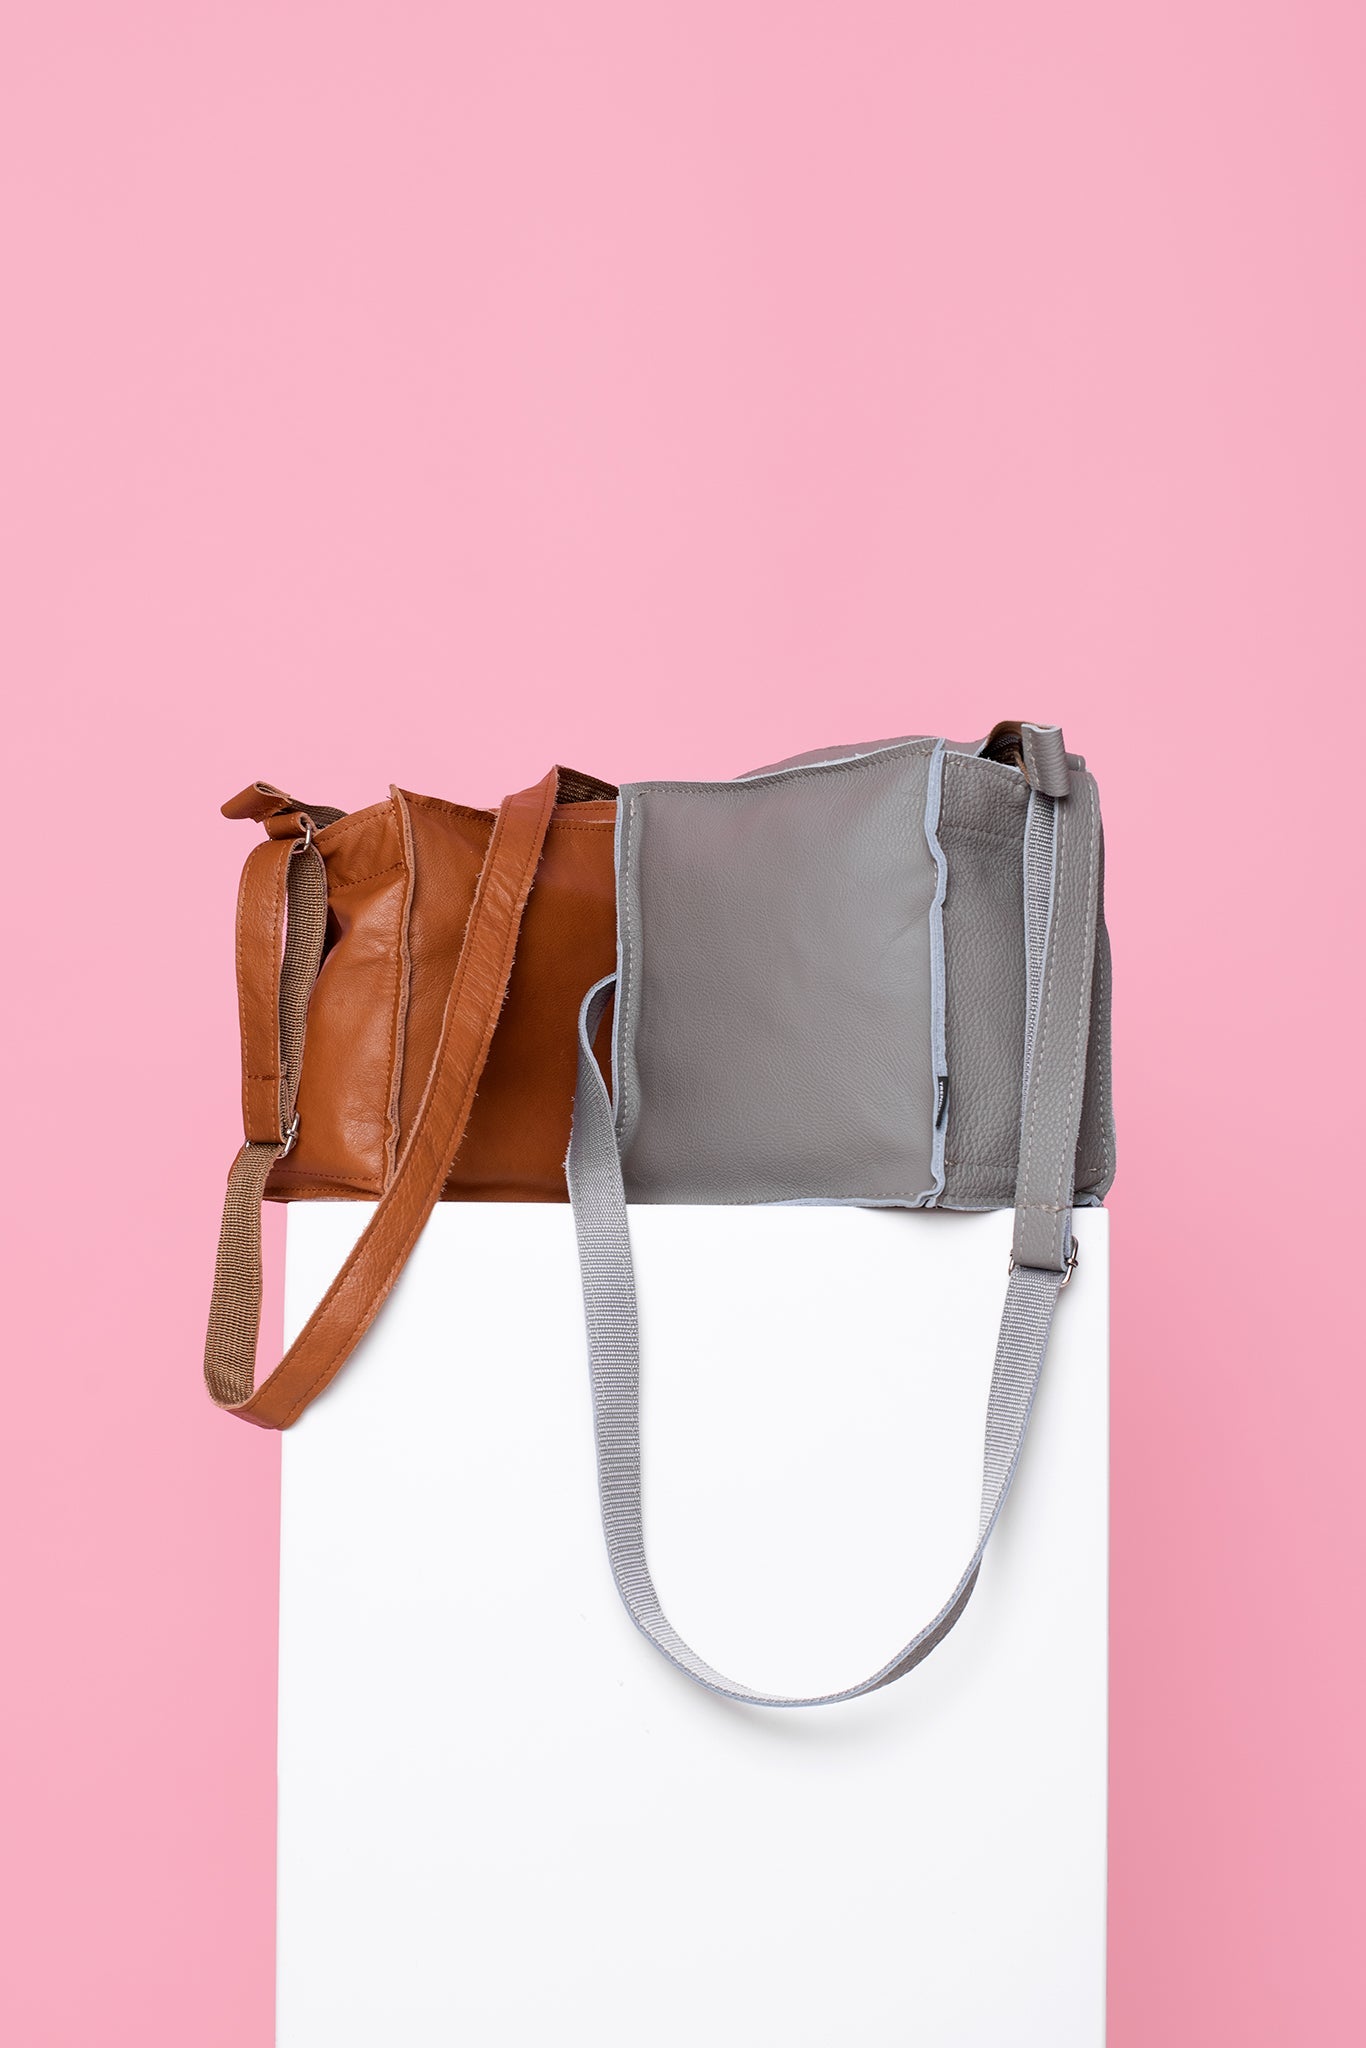 Handmade Folk 1 shoulder bag in light grey leather, crafted from furniture industry leftovers, showcasing a unique design with a strap. Made in Estonia for durability and eco-friendliness.